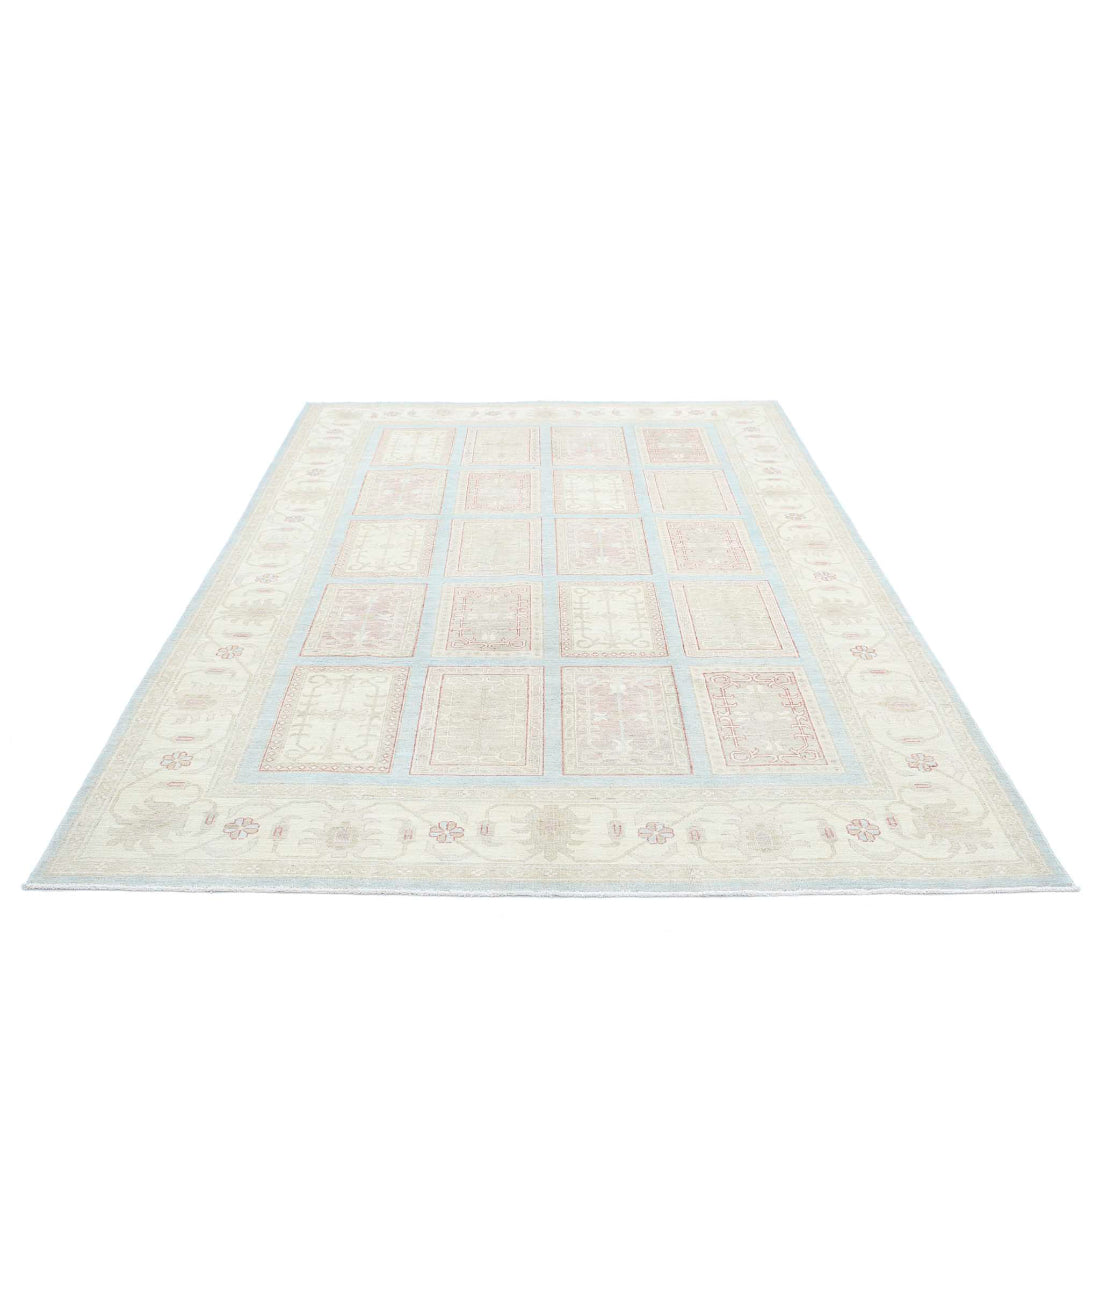 Serenity 6'8'' X 9'8'' Hand-Knotted Wool Rug 6'8'' x 9'8'' (200 X 290) / Blue / Ivory